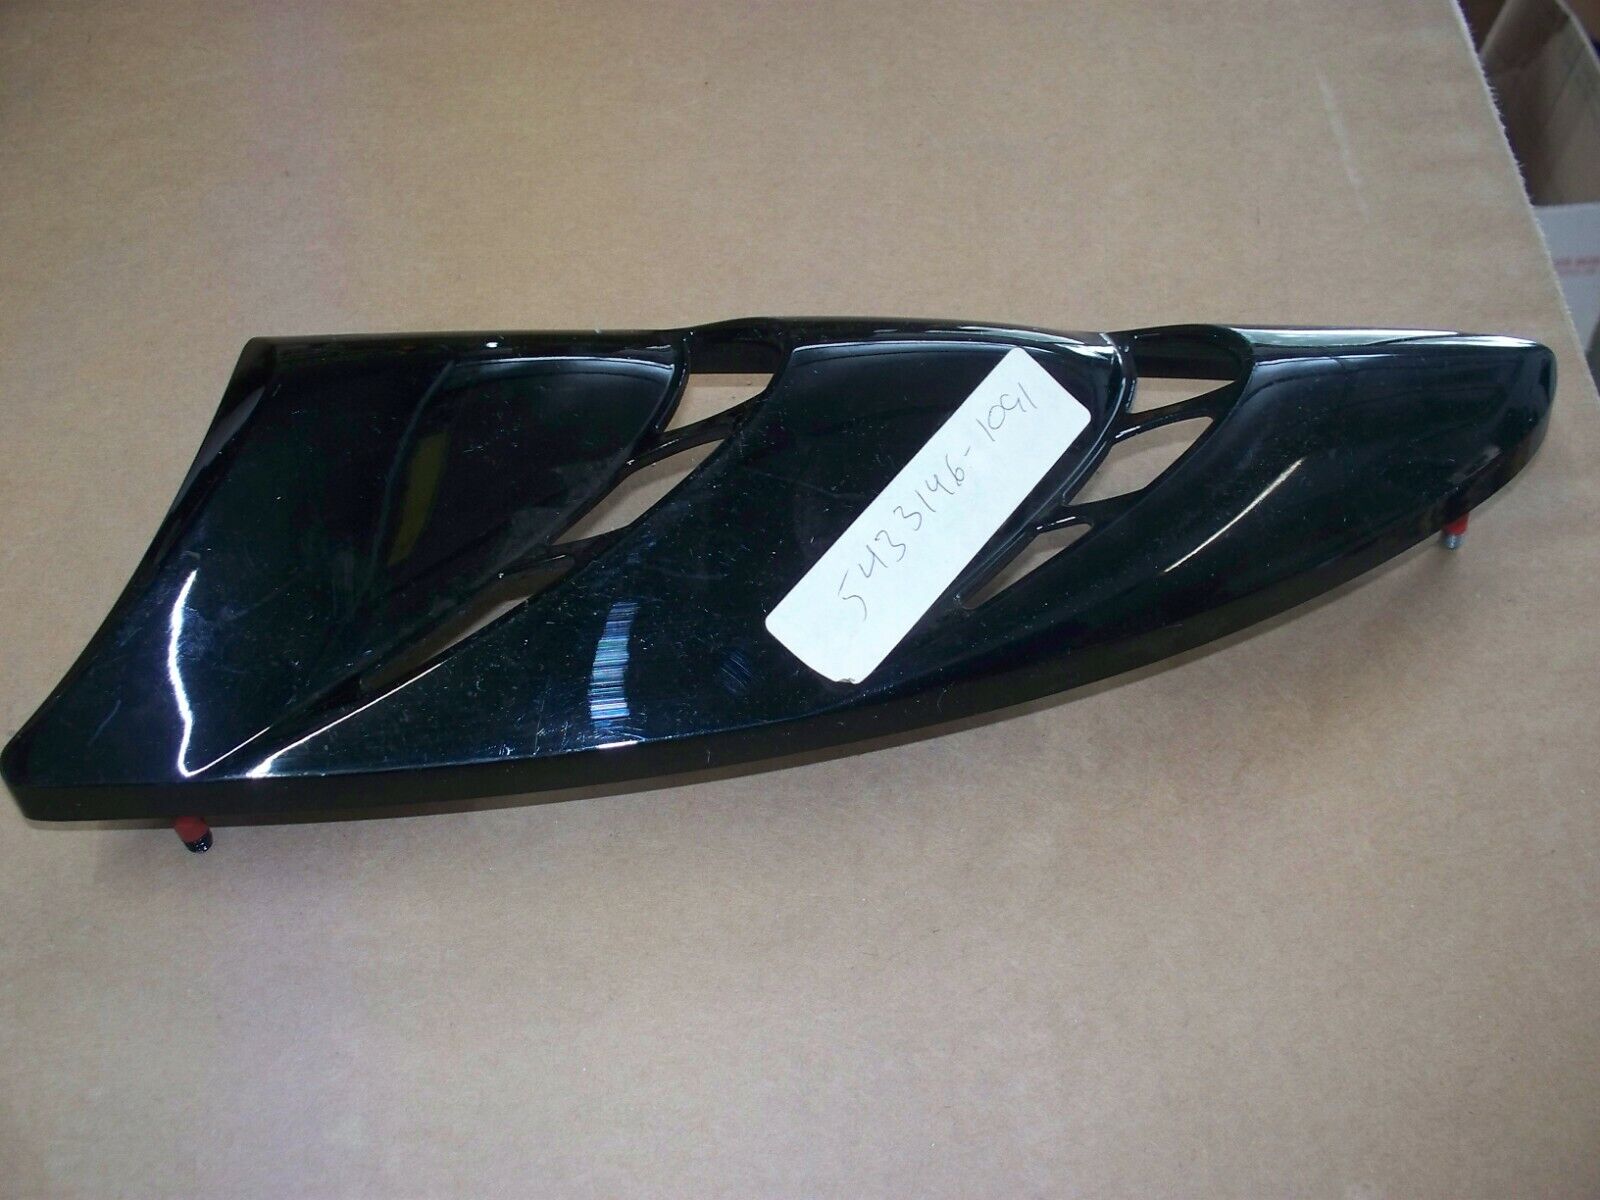 Polaris PWC Watercraft 1999 SLH LH Translated Cowl Blk Intake O Clearance SALE! Limited time! NEW Scuffed